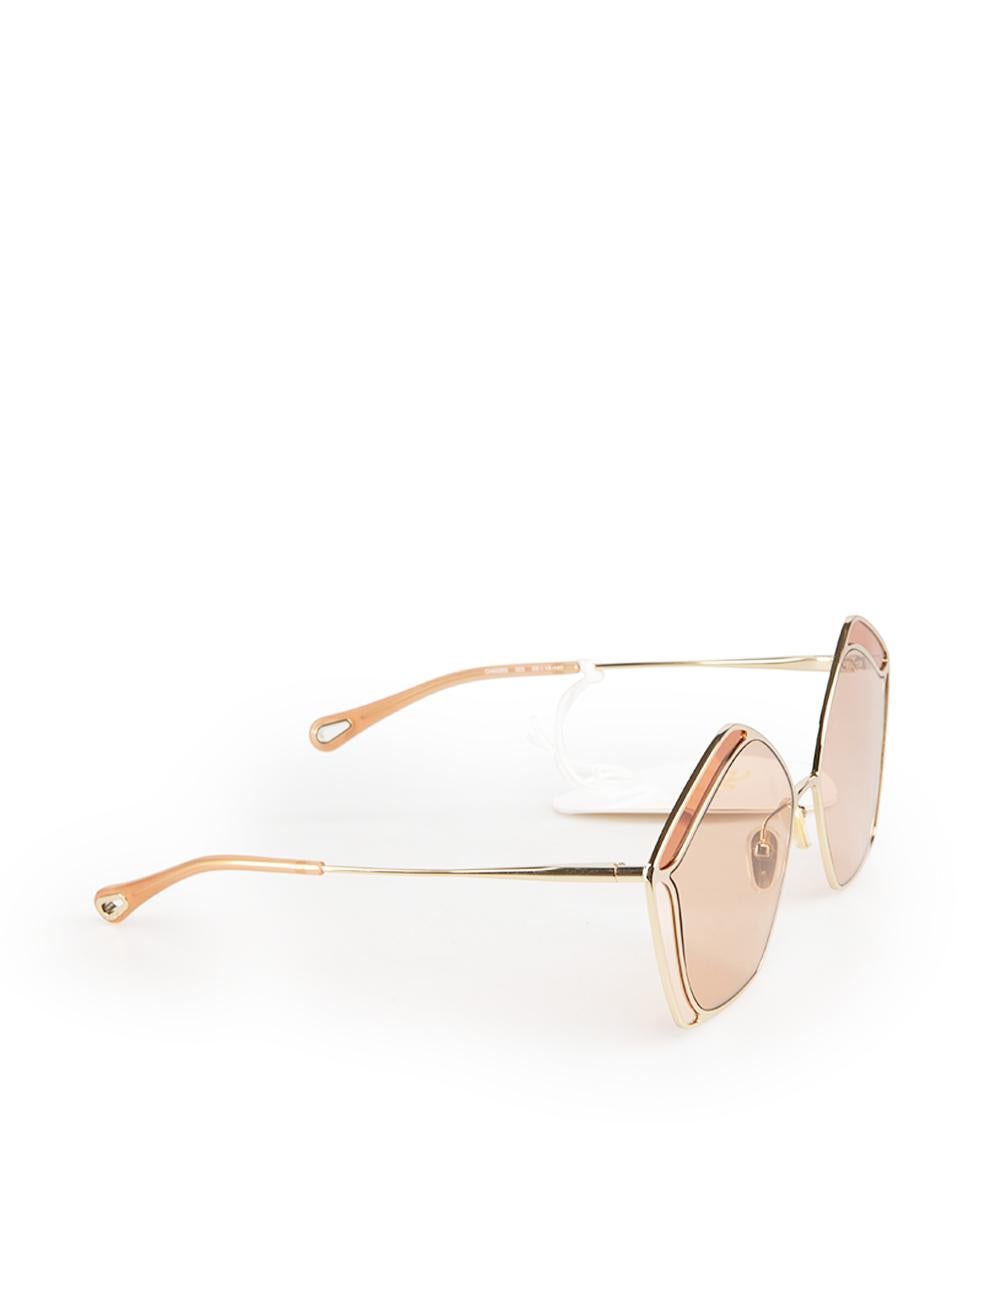 CONDITION is Never worn, with tags. No visible wear to sunglasses is evident on this new Chloé designer resale item. Comes in original case with box.
  
Details
Gemma model
Pink
Metal
Sunglasses
Geometric frame
Tinted pink lenses
  
Made in